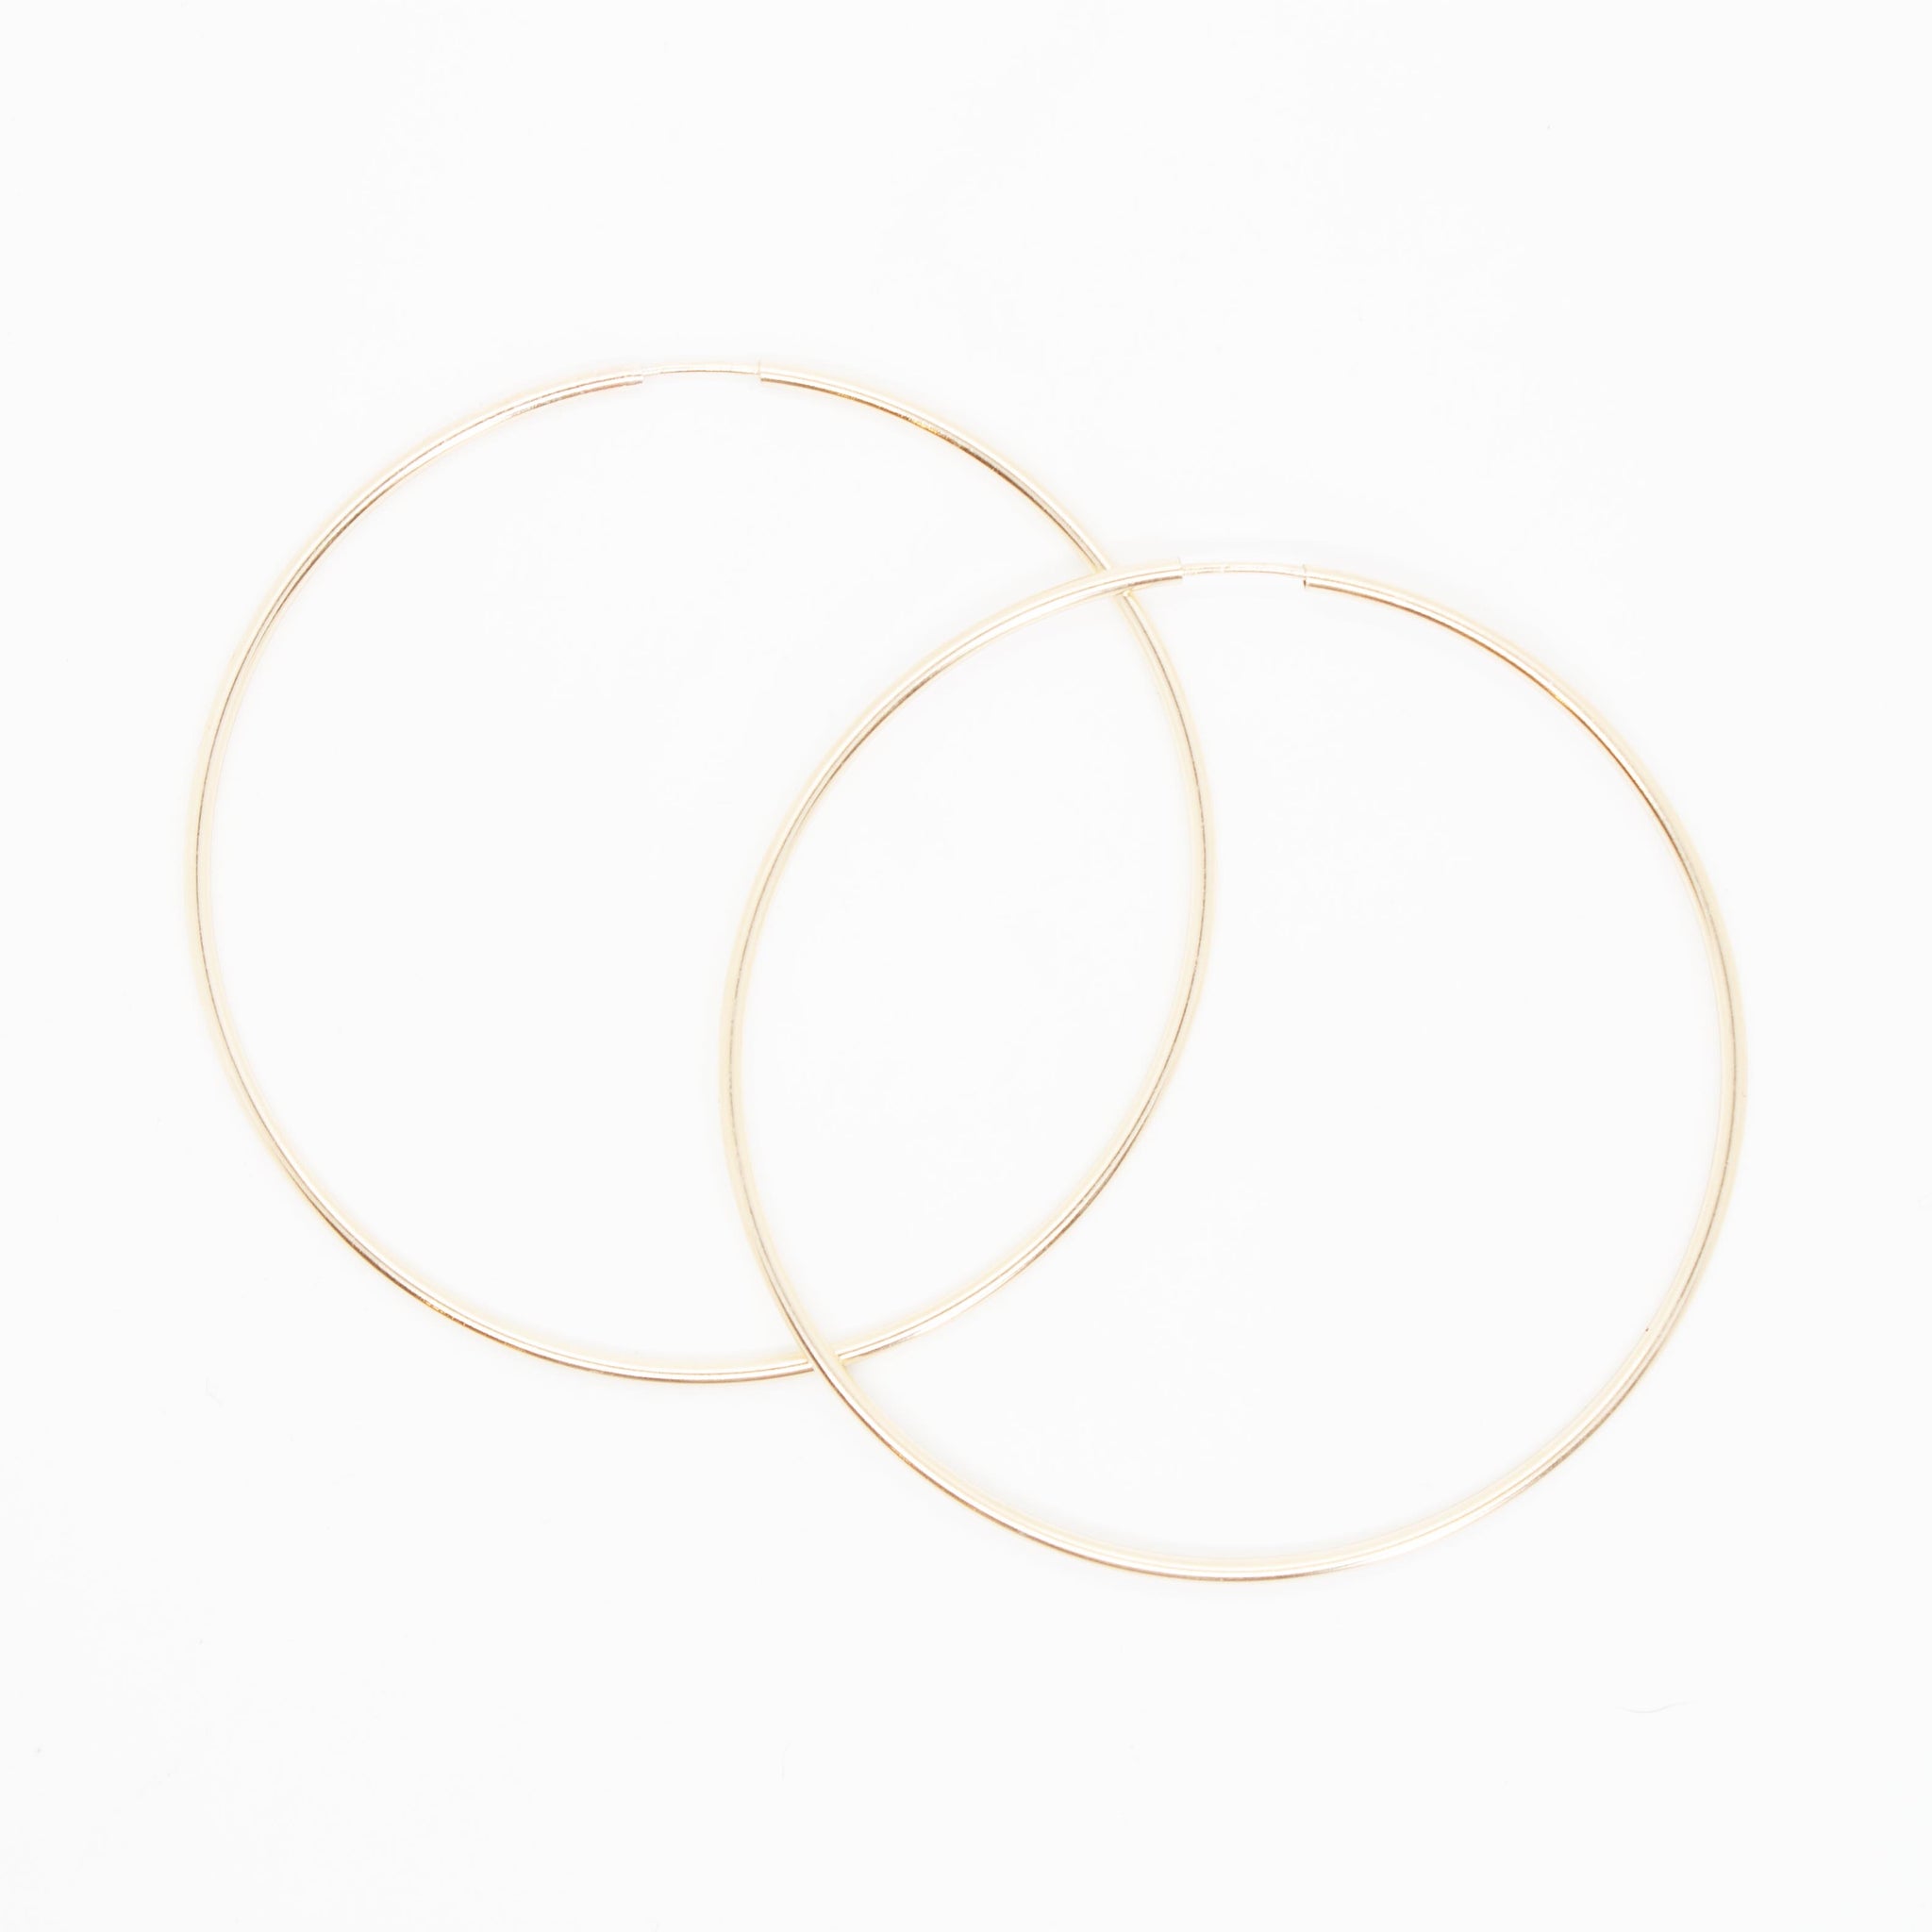 Make a statement with these substantial yet delicate gold hoops. 14 kt gold filled* endless hoop earrings 50mm diameter. *Gold-filled jewelry is composed of a solid layer of gold, mechanically bonded to sterling silver. You are fine to shower in it, get it wet, wear it for life! kp jewelry co.